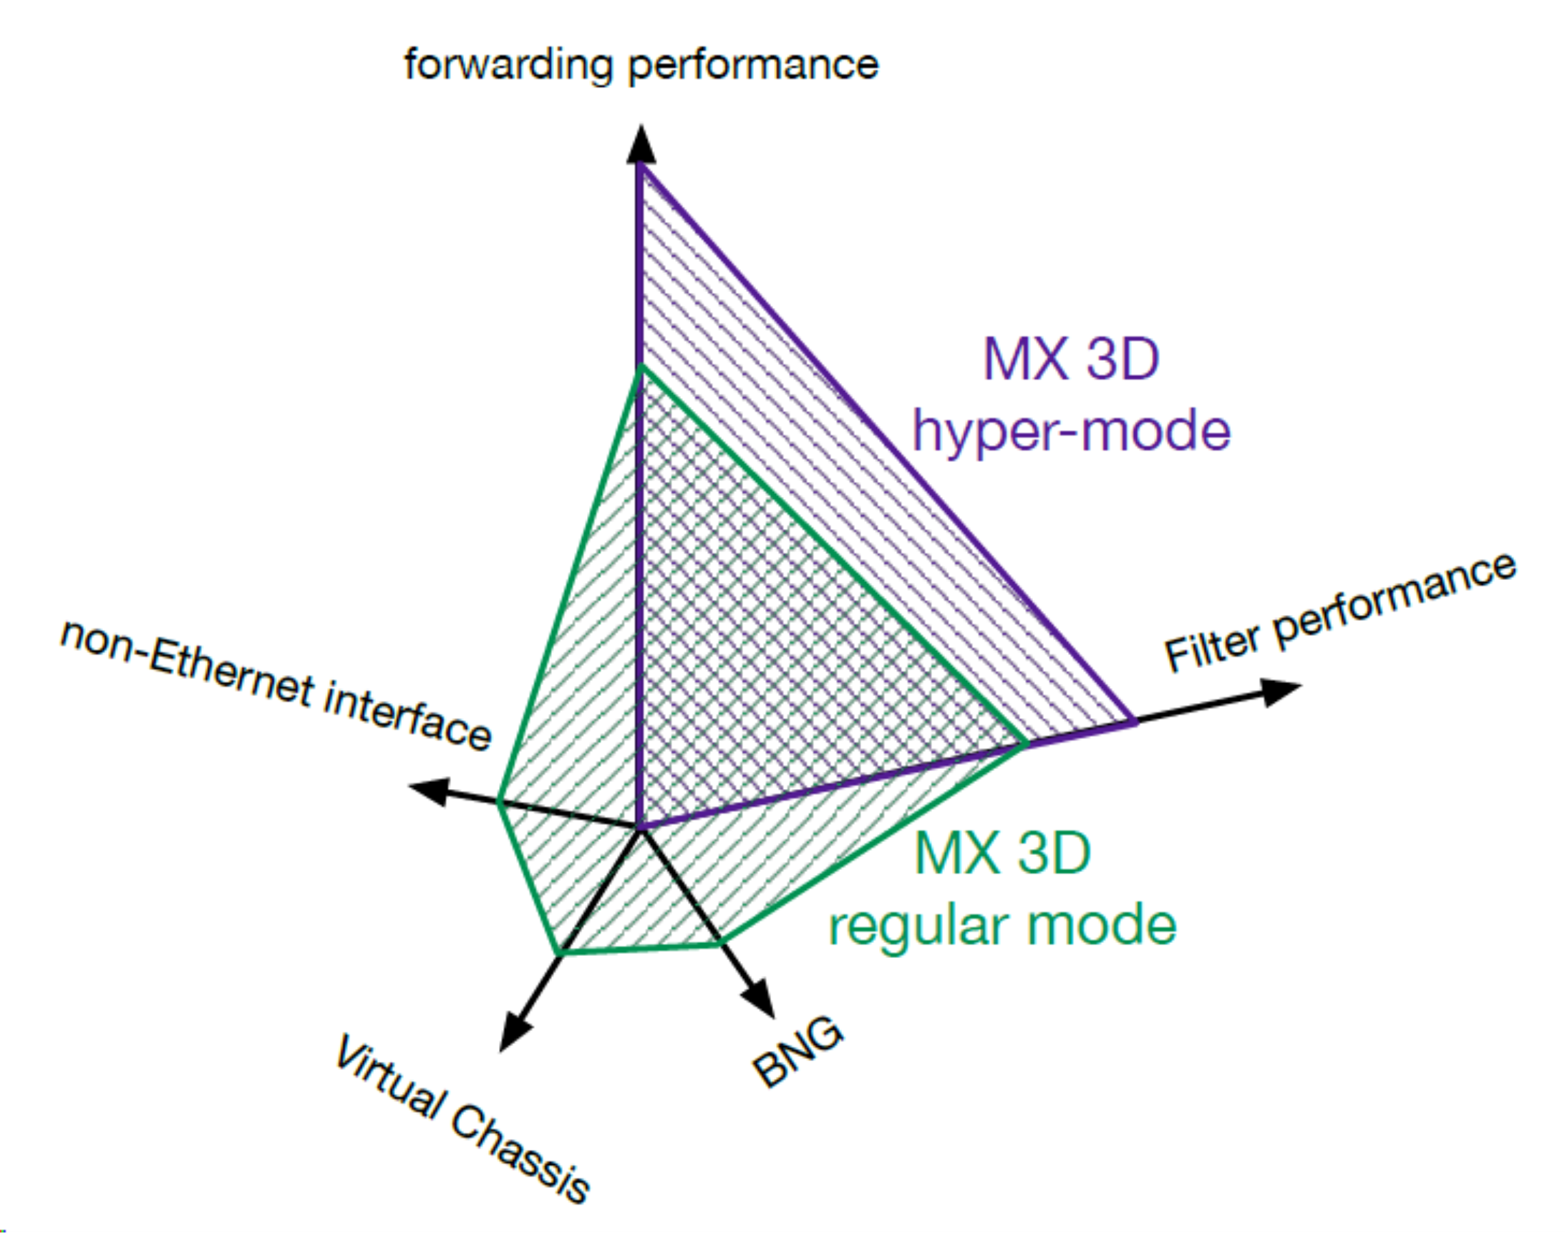 Comparison of regular mode and hypermode performance